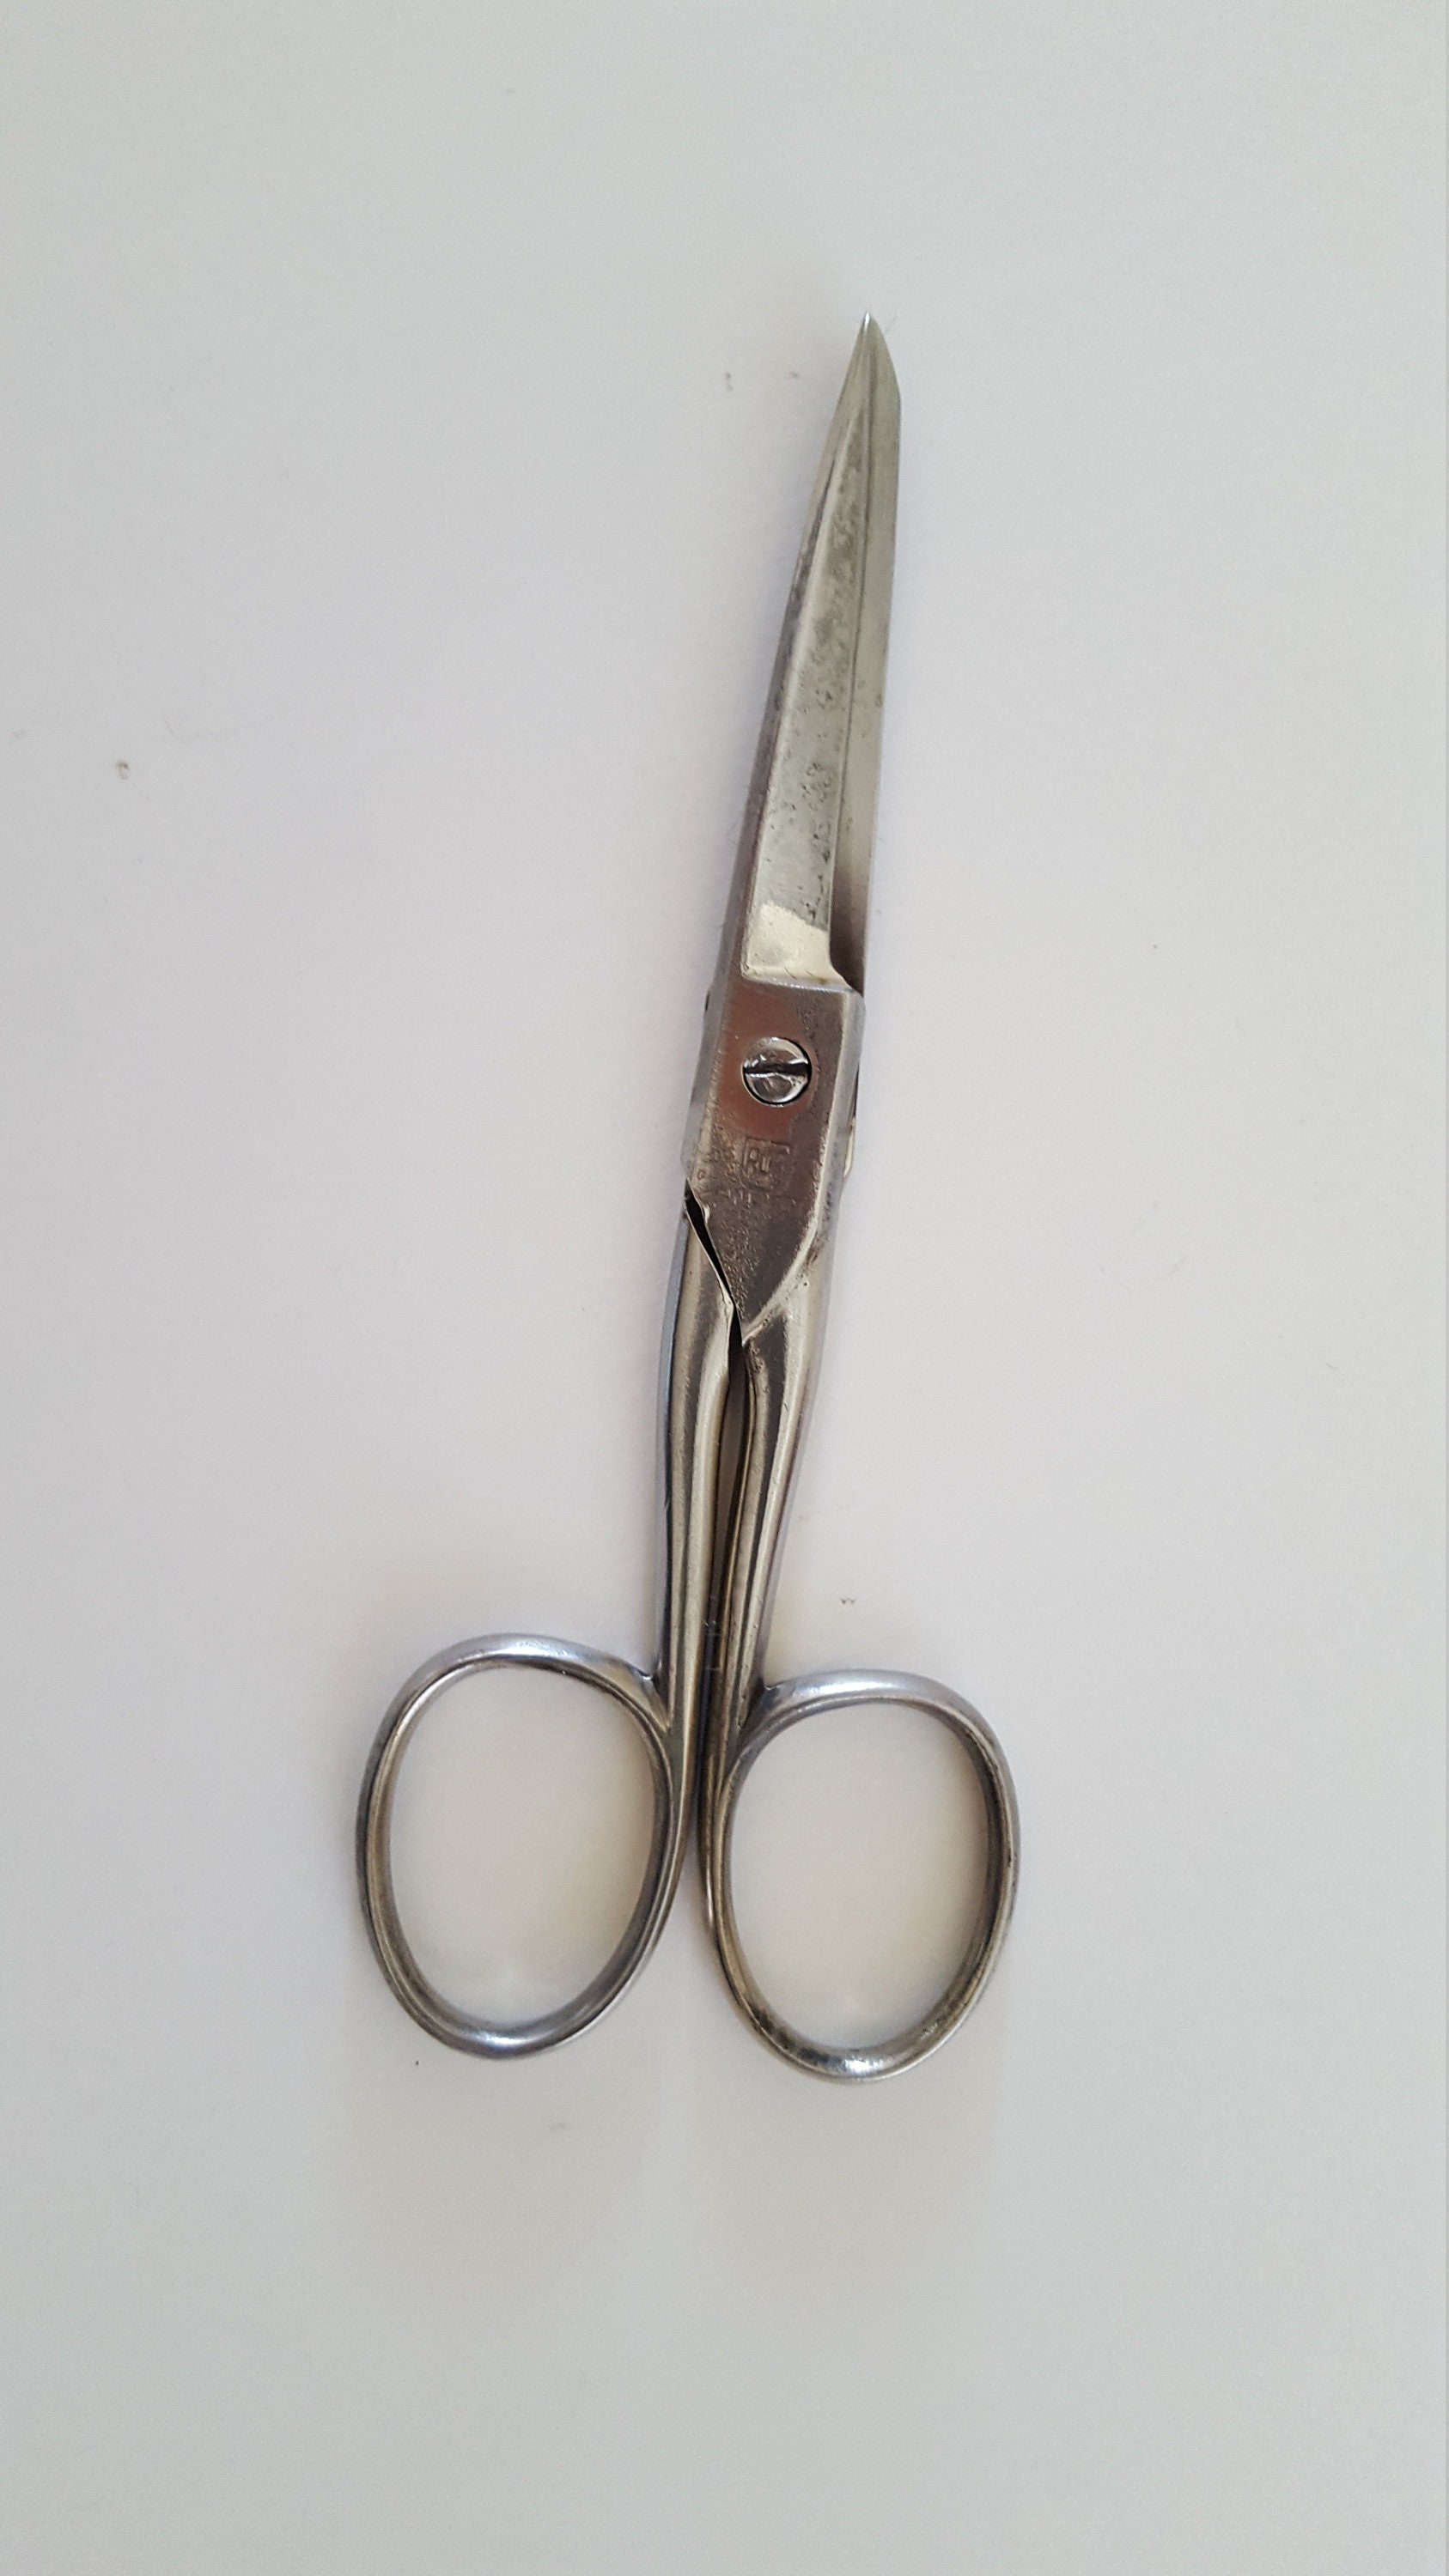 Snagshout  Vintage Embroidery Sharp Scissors 2 Pack, 5 Inches